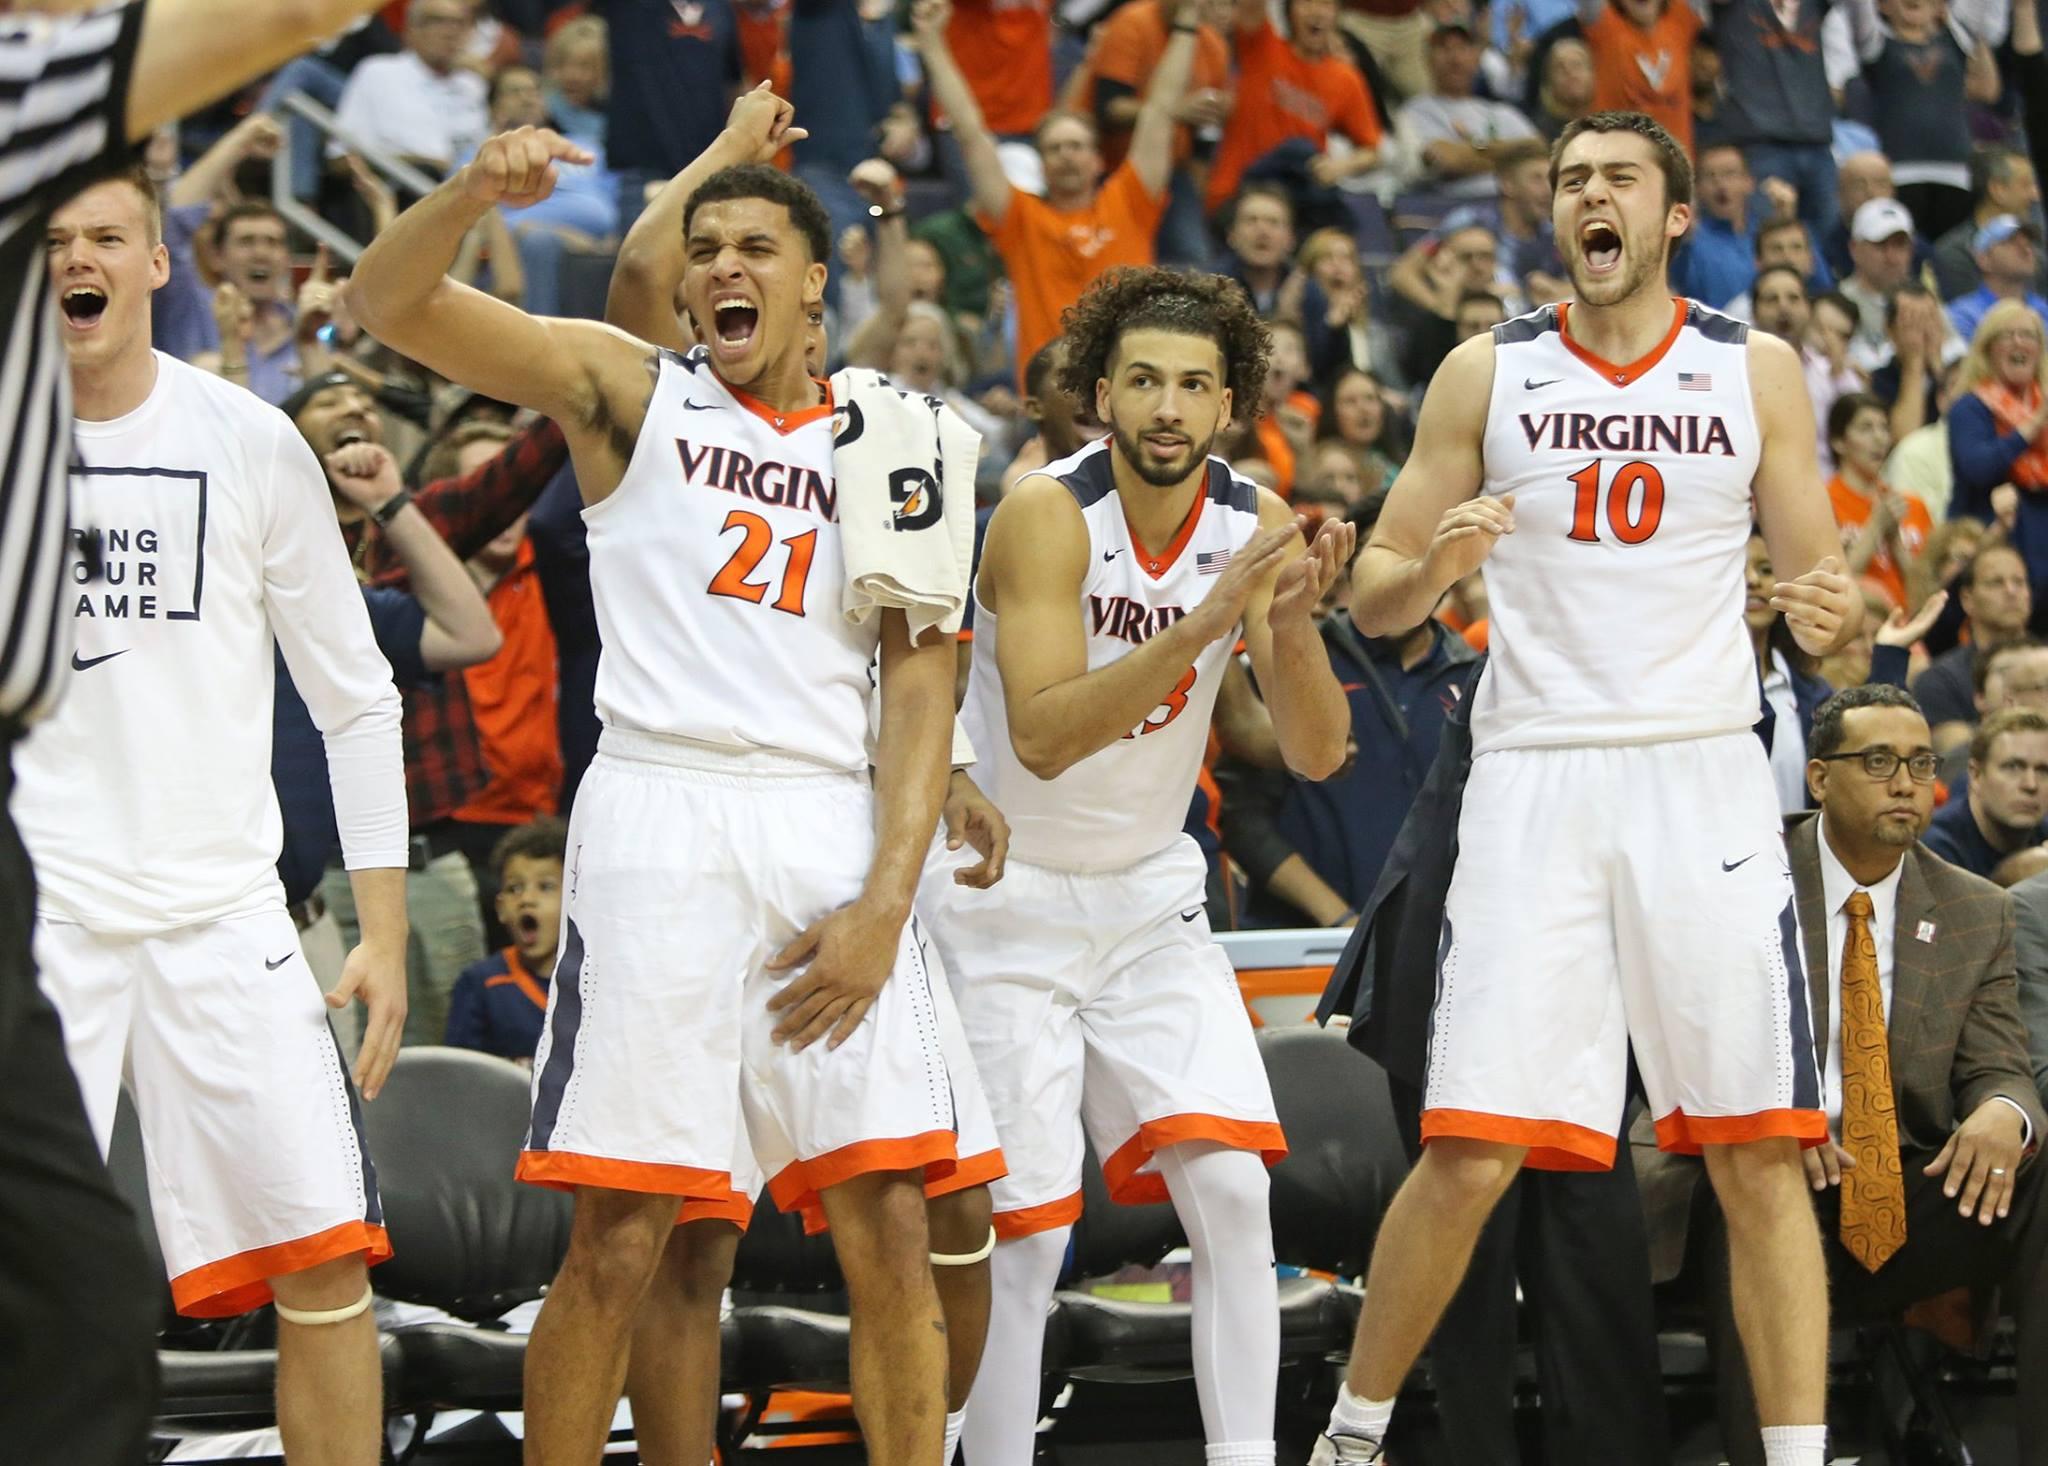 UVA Men's basketball players cheering on their teammates from court side